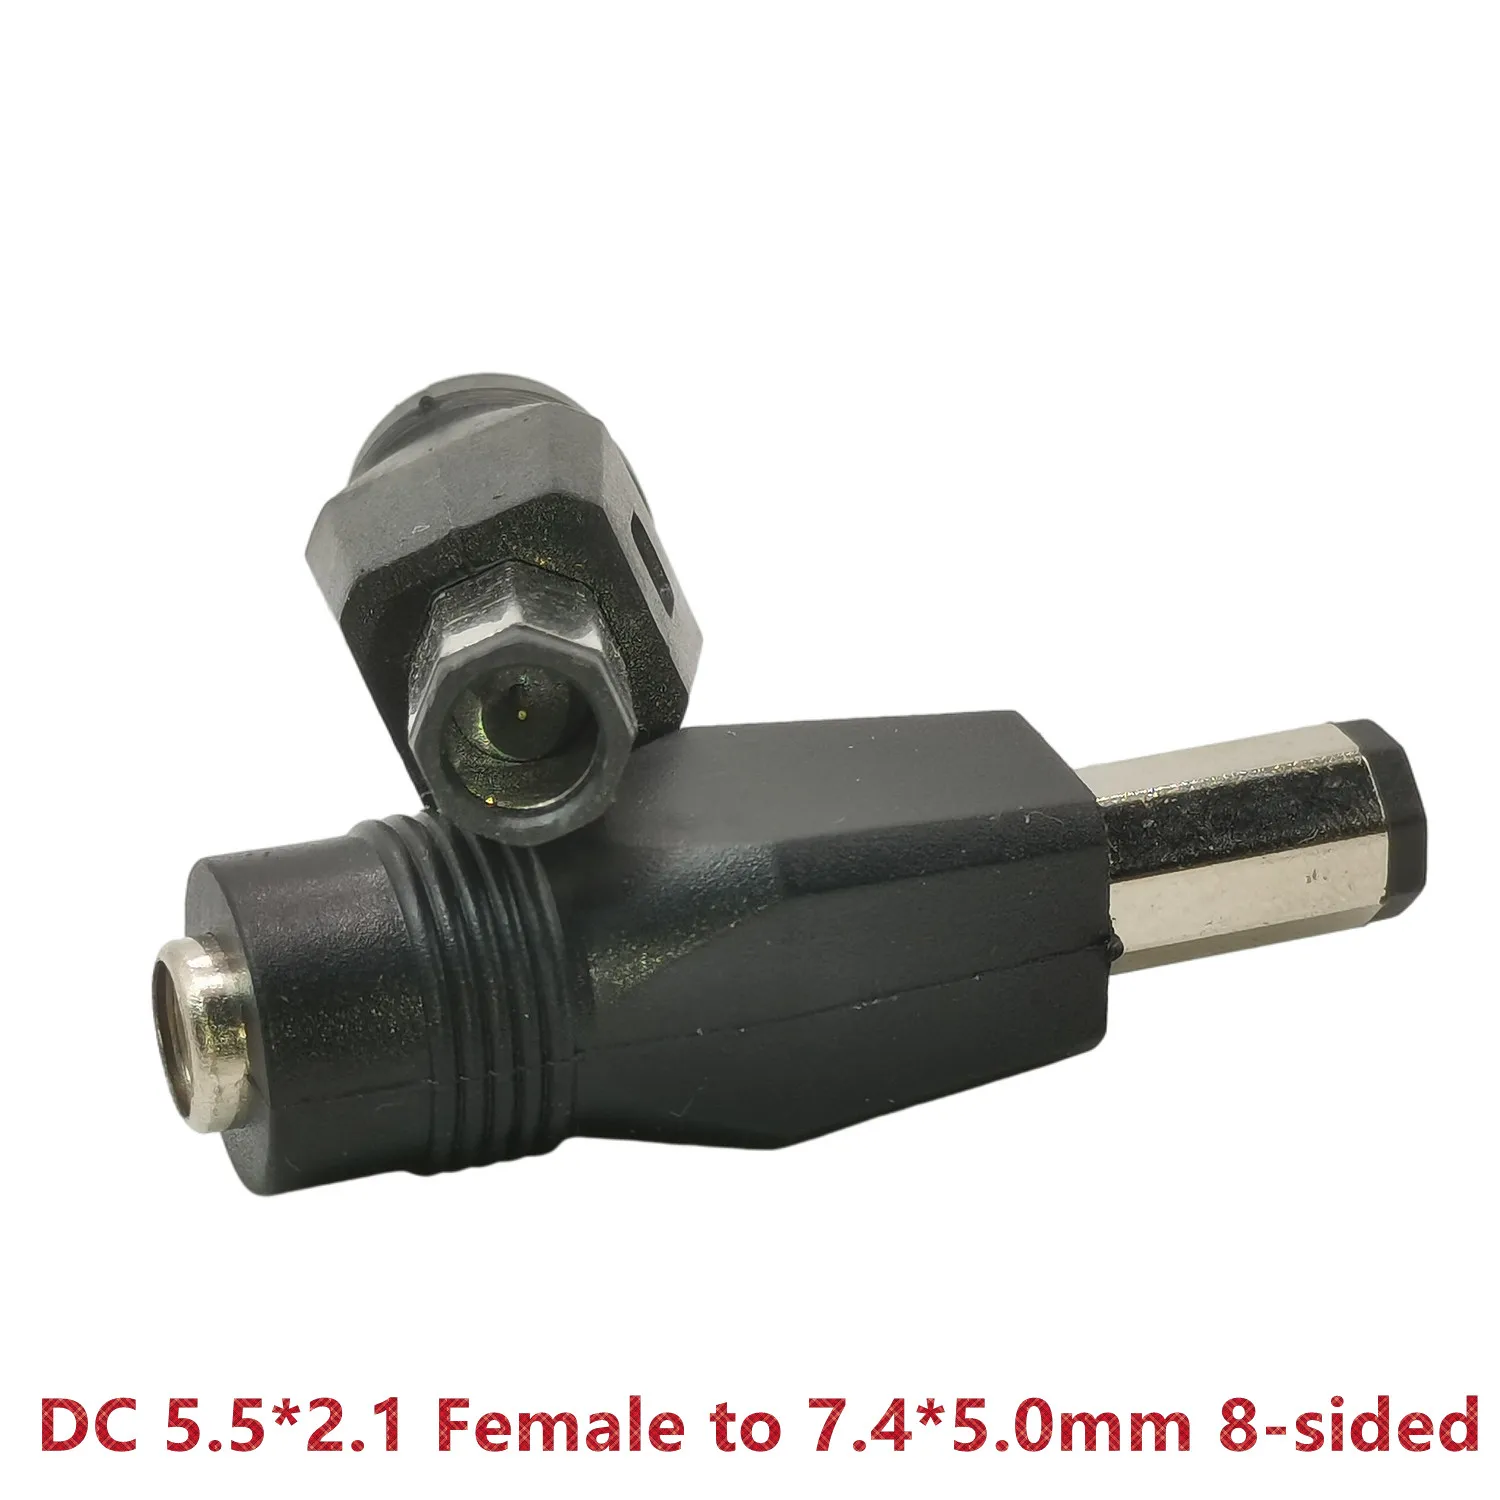 

Jack 5.5x2.1mm Female to DC 7.4X5.0mm Adapter 5.5mm x 2.1mm to 7.4mm x 5.0mm Connector 2-pack